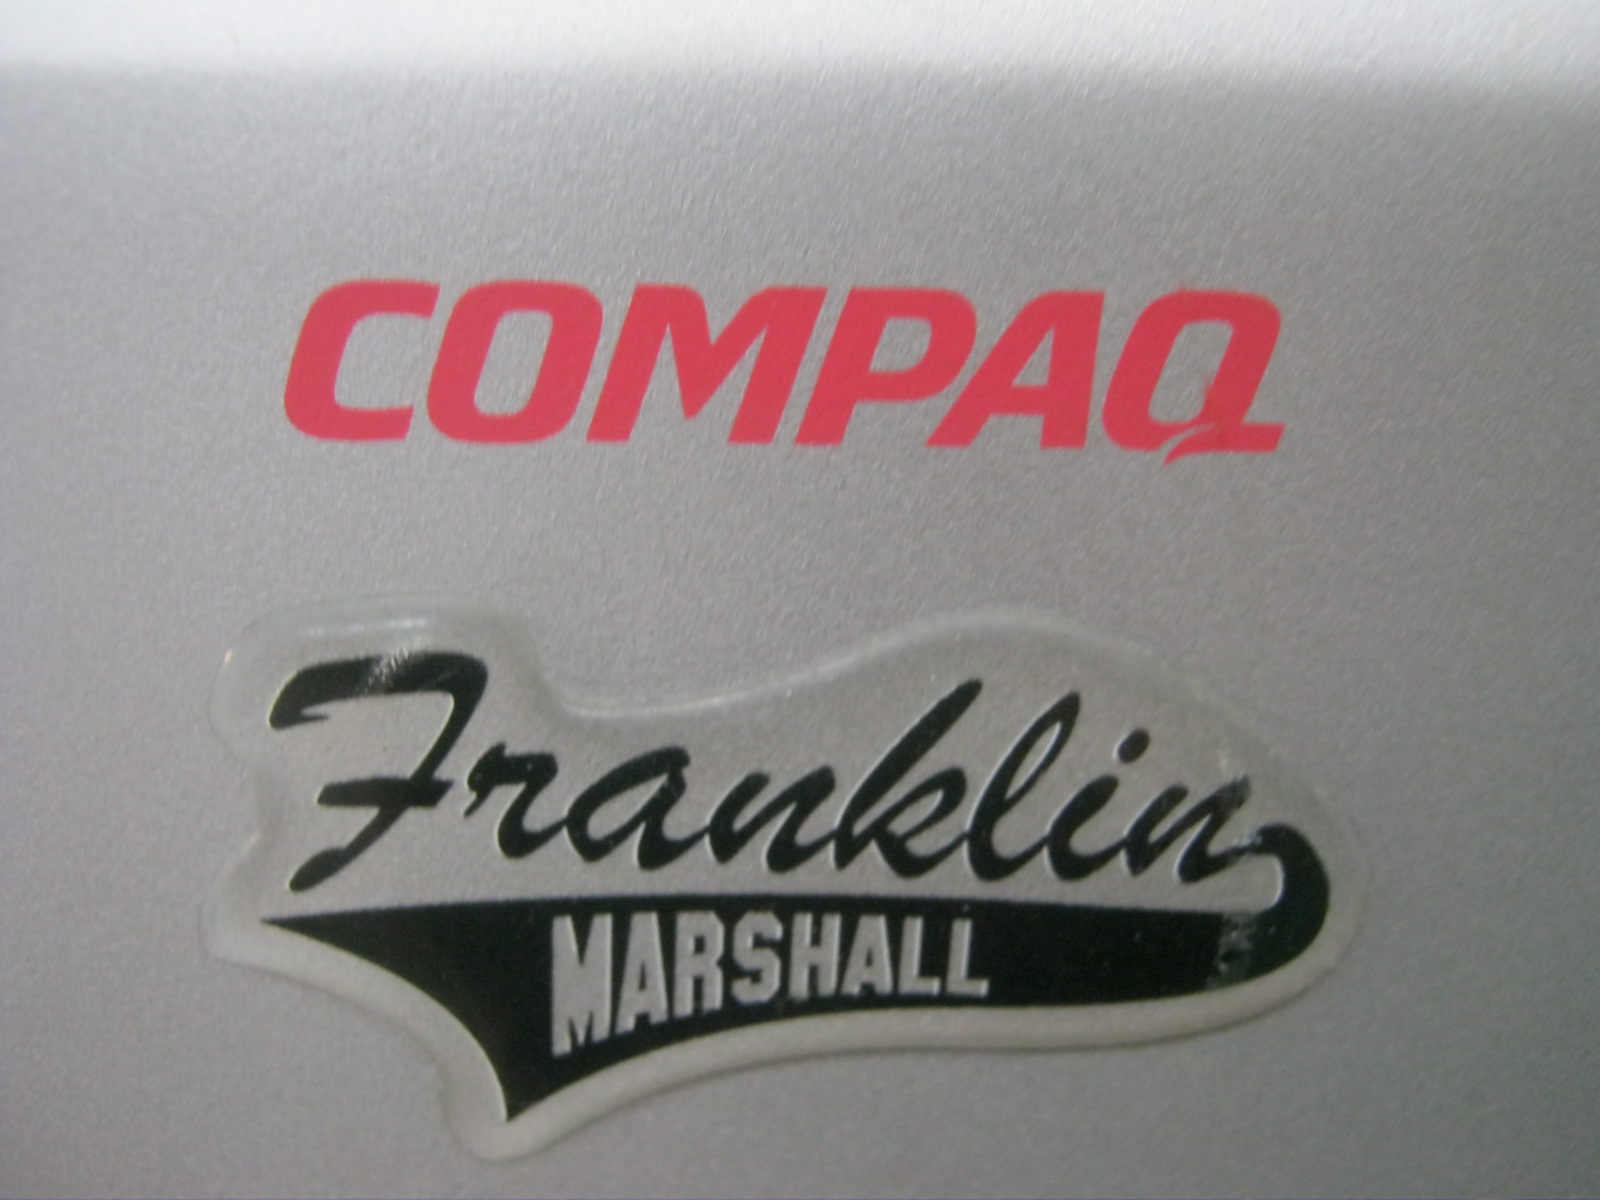 http://museodelcomputer.org/parts/compaq/D31MD2/IMG_6049.JPG